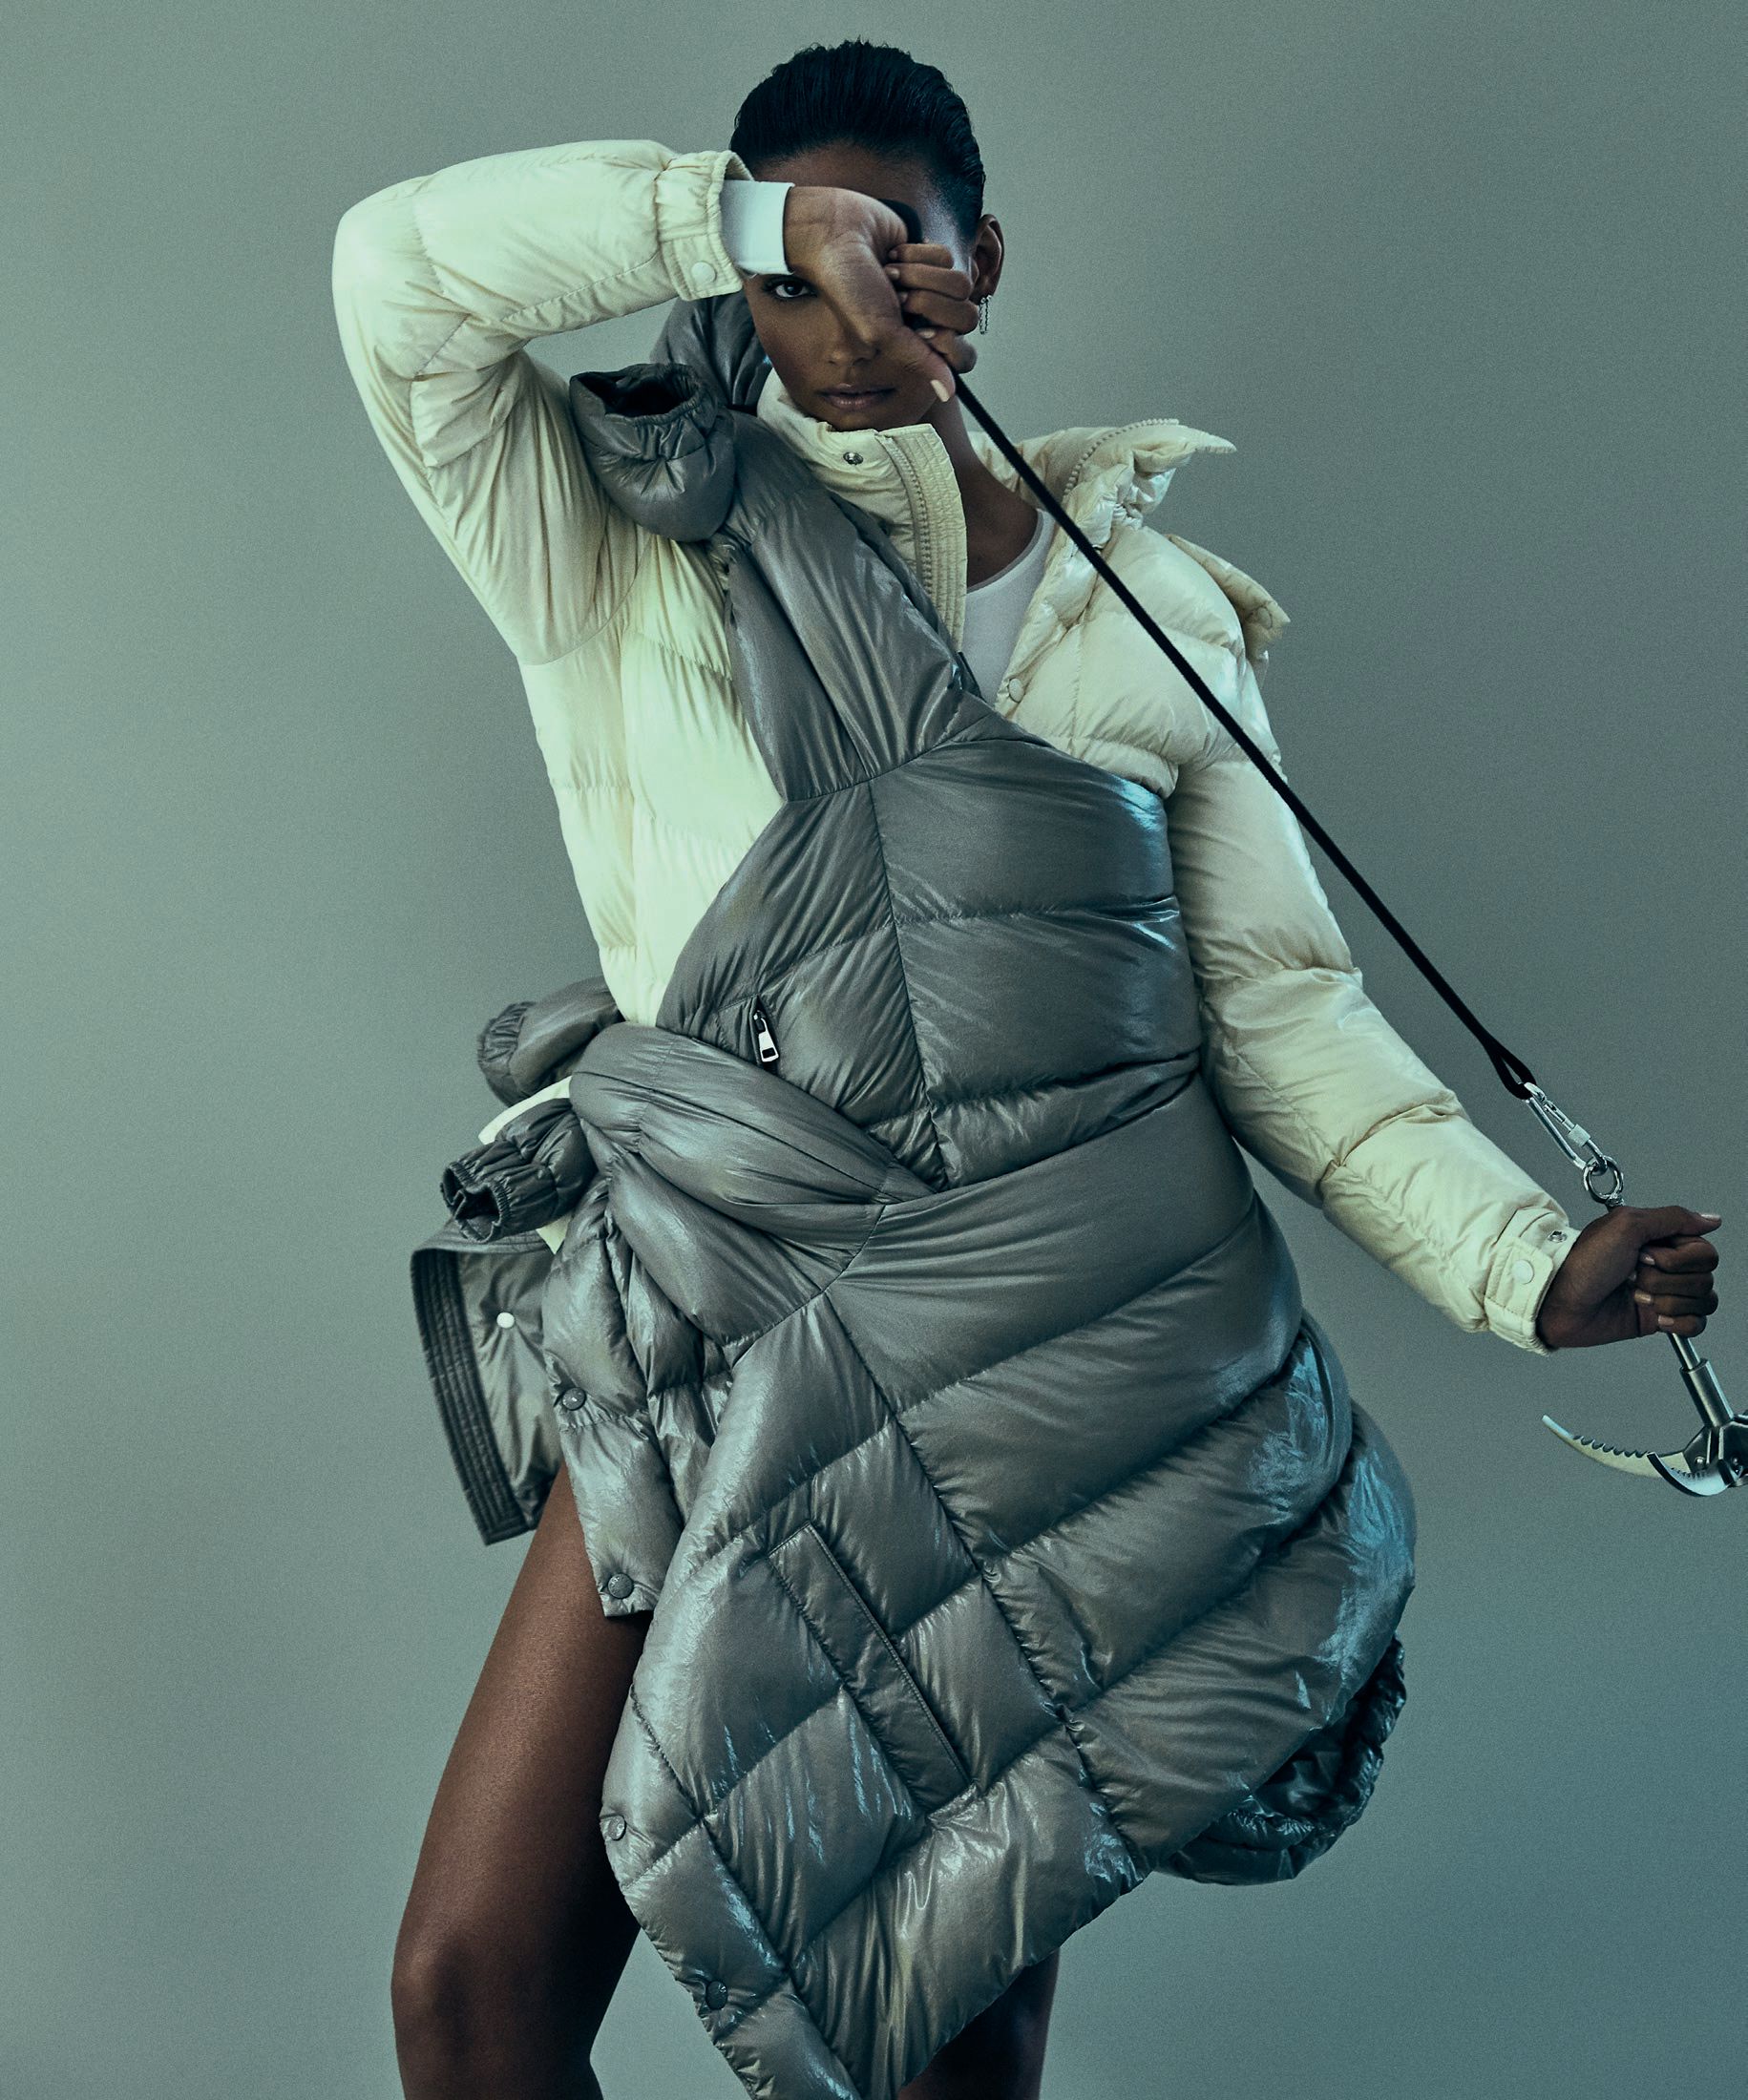 Moncler Maya 70 down jacket in Snowflake White and Basalt Gray, moncler.com. Hair by David Cruz at Tracey Mattingly Makeup by Steven Canavan using Dior Vernis at L’Atelier NYC Manicure by Jazz Style using Chanel at See Management Models: Serigne Lam, Muse Management; Cora Emmanuel, The Society Management; Izzy Wild, The Industry Model Management SET DESIGN: JULIE MILLER FOR IVY HOUSE STUDIO; SET DESIGN ASSISTANT: NICOLÁS ROMANO; PHOTO FIRST ASSISTANT: OMER KAPLAN; PHOTO ASSISTANT: BRIAN PAK-HUNG LAU